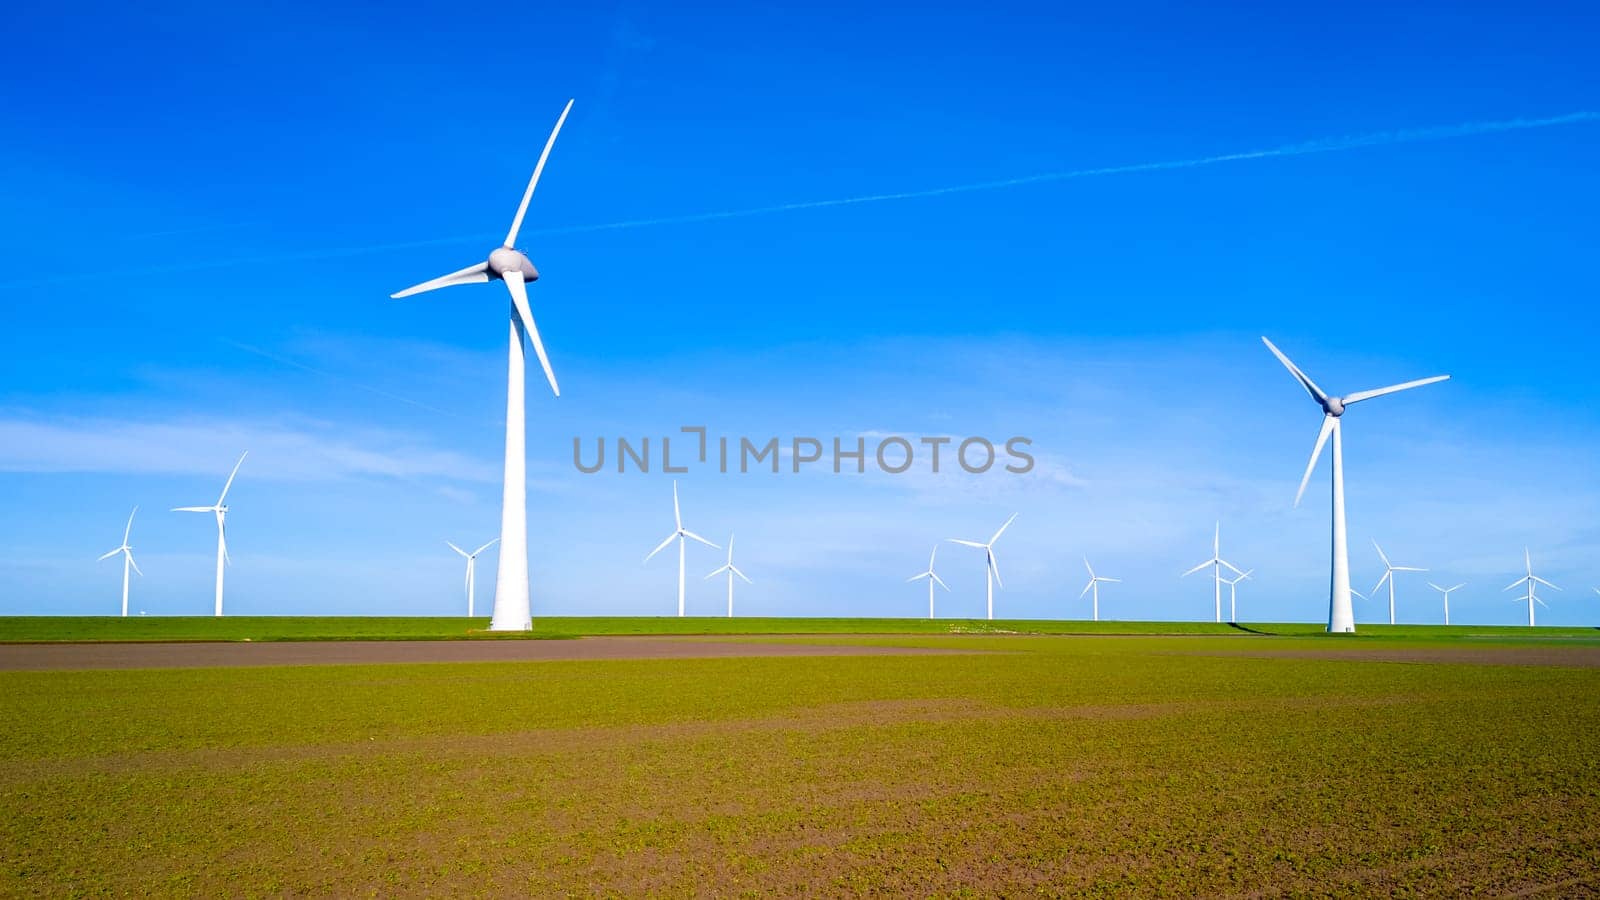 A group of sleek wind turbines stand tall in a vibrant field in Flevoland, harnessing the power of the wind on a sunny spring day. windmill turbines